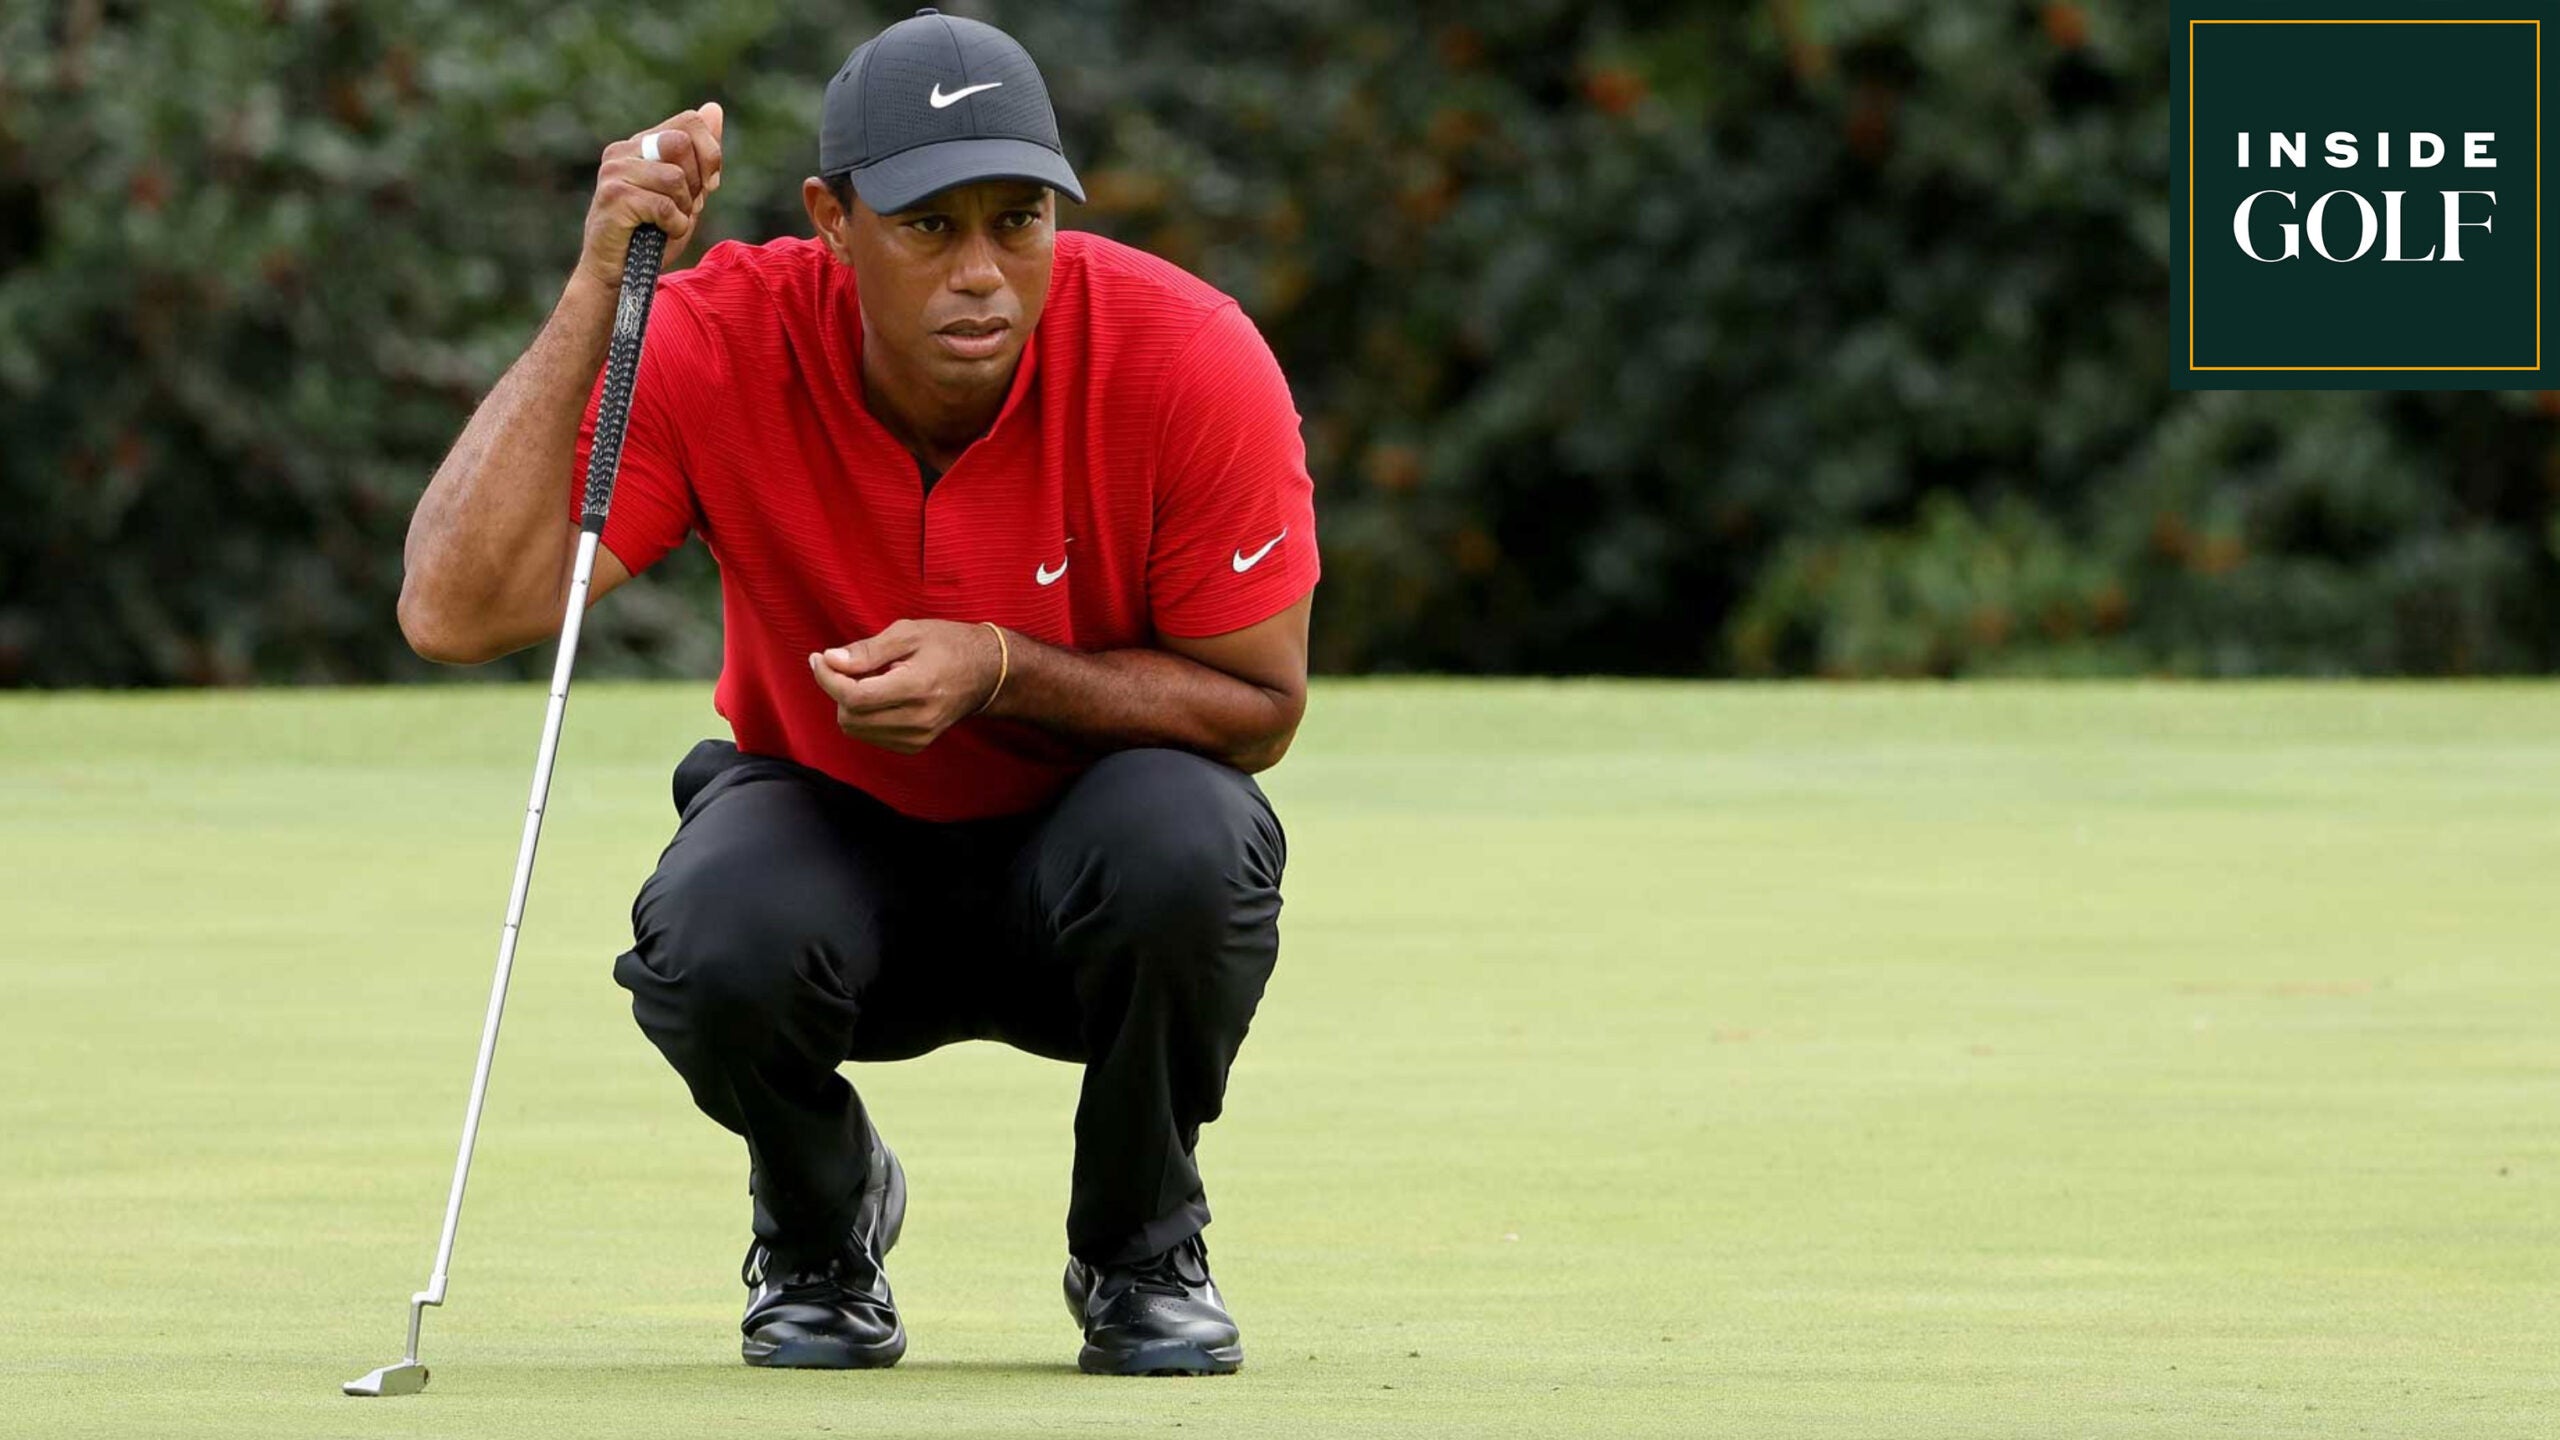 Ready for Tiger's return? We are!